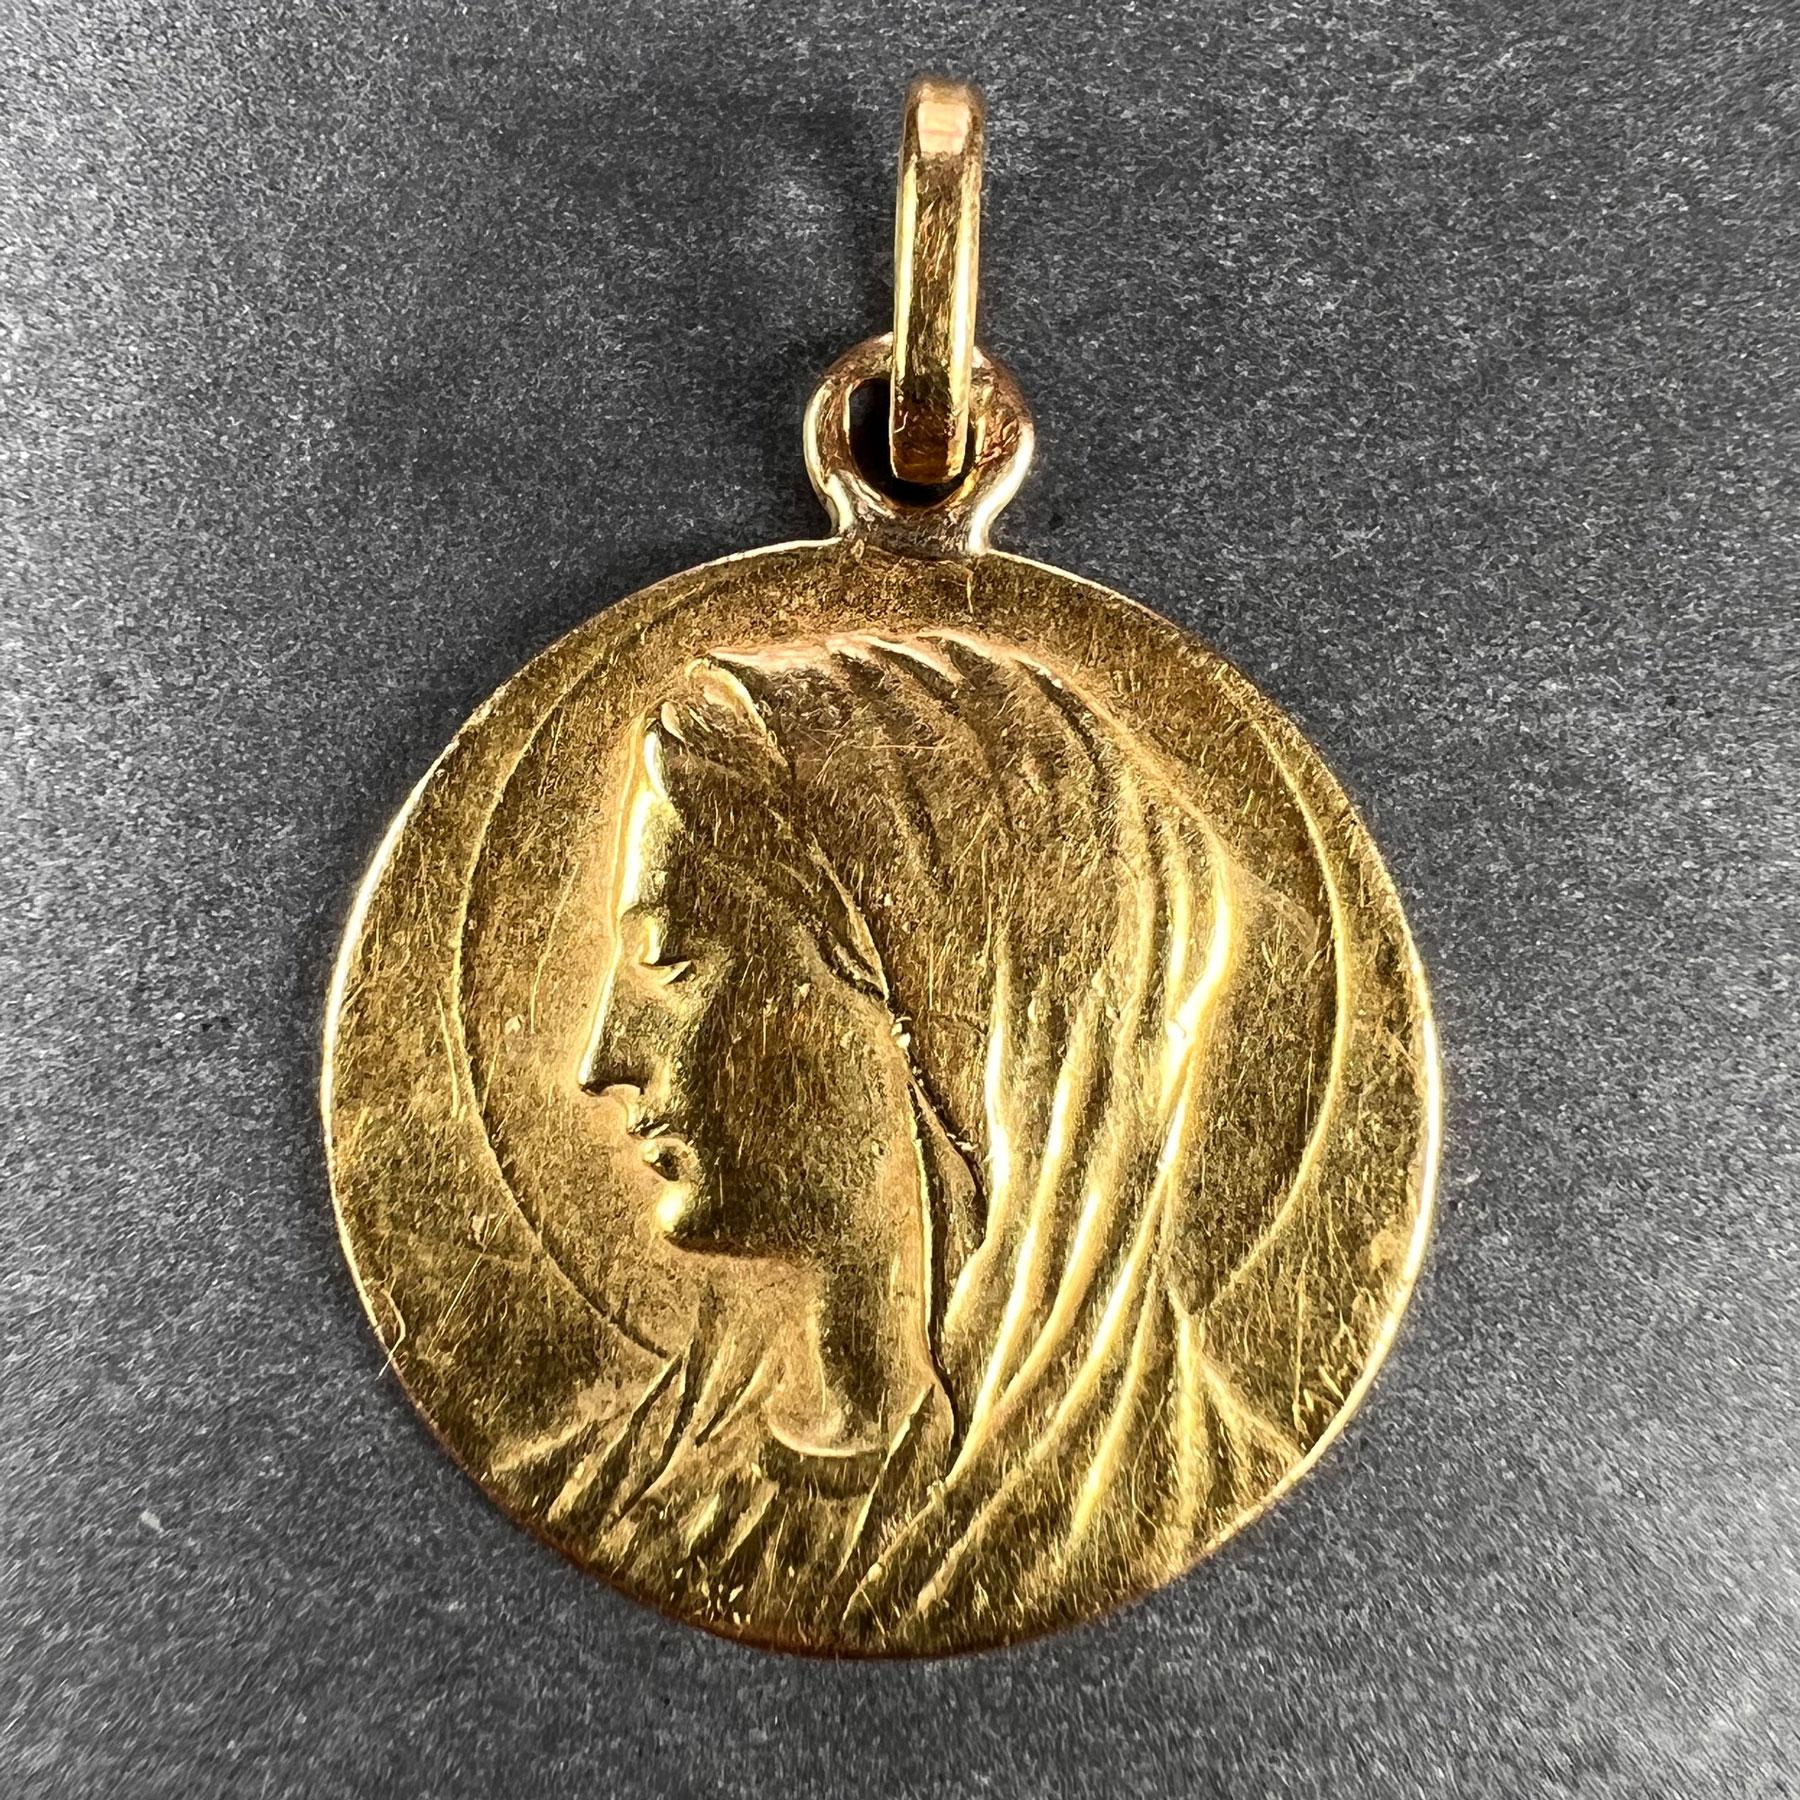 A French 18 karat (18K) yellow gold charm pendant designed as a medal depicting the Virgin Mary. Signed Mazzoni. Stamped with the horse’s head  mark for 18 karat gold and French manufacture between 1838-1919. The reverse depicting a lily and